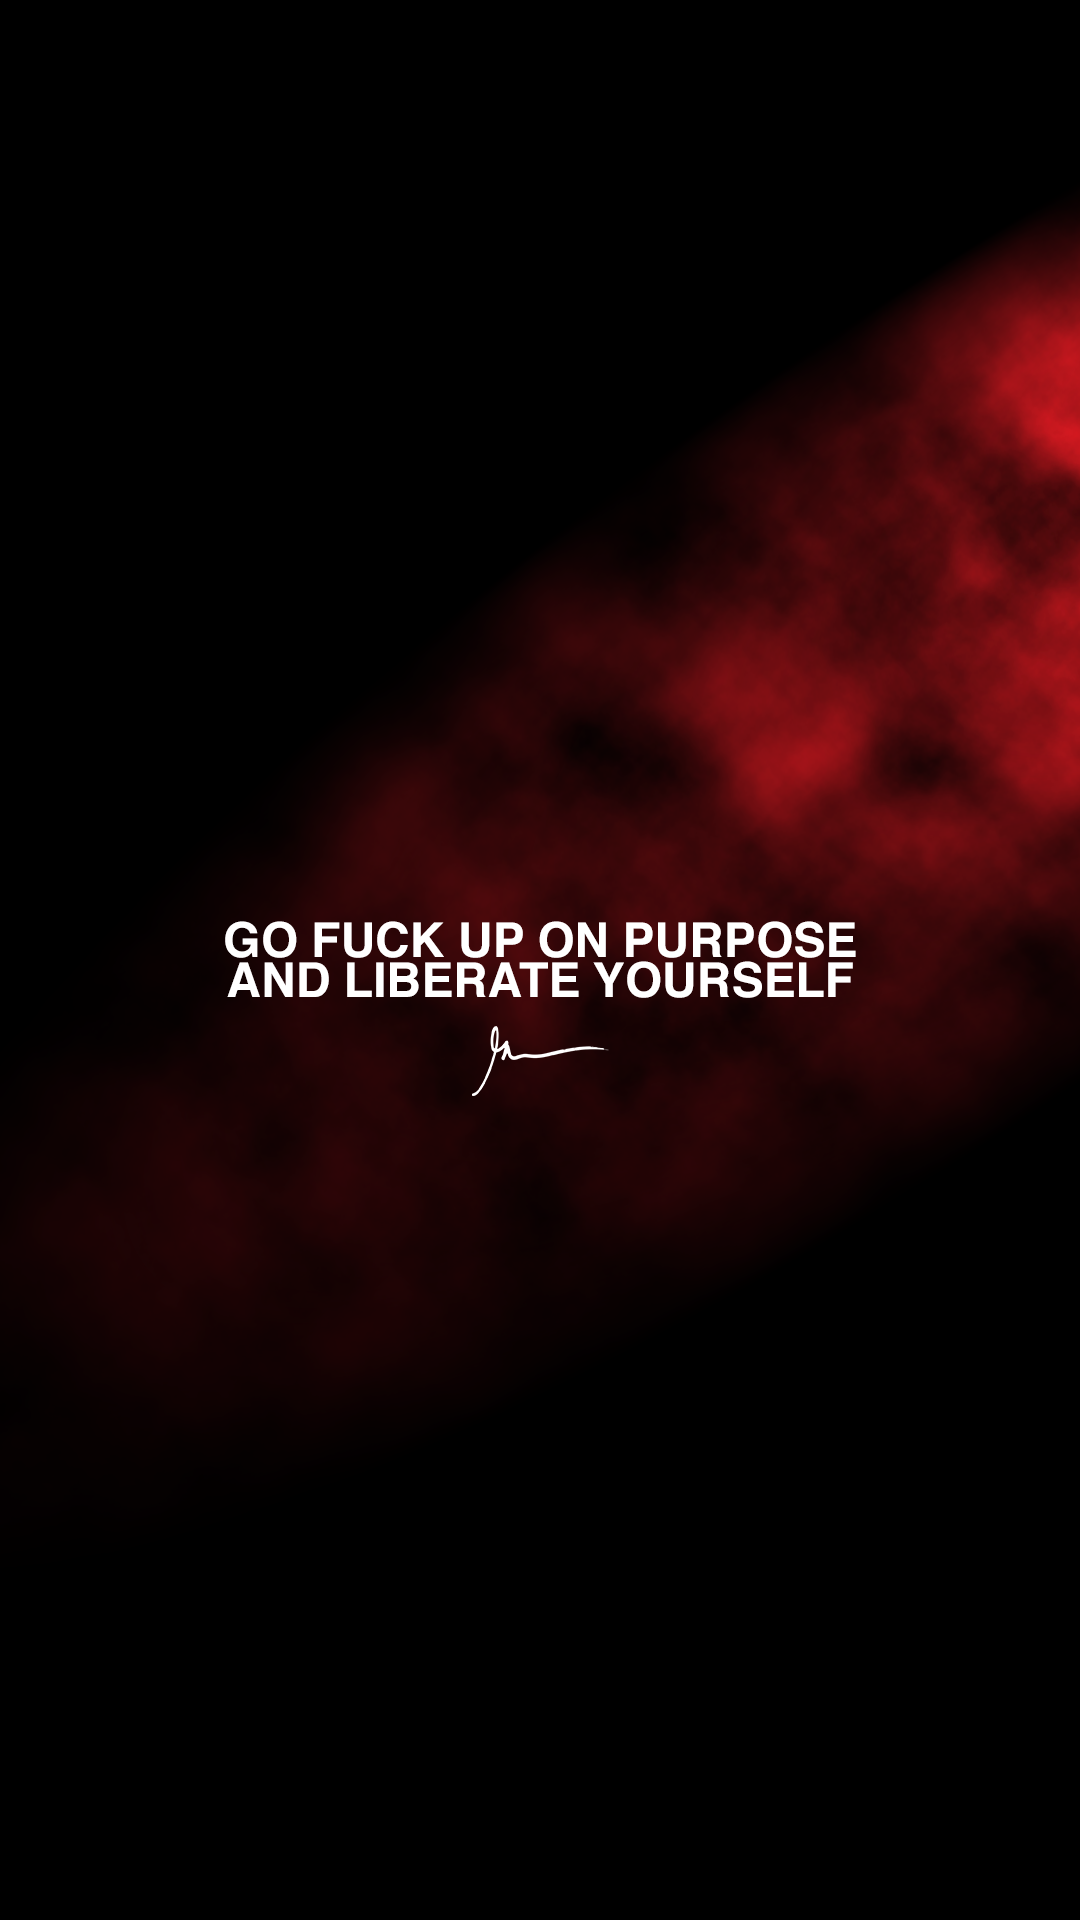 GaryVee WallPapers. Many of you have